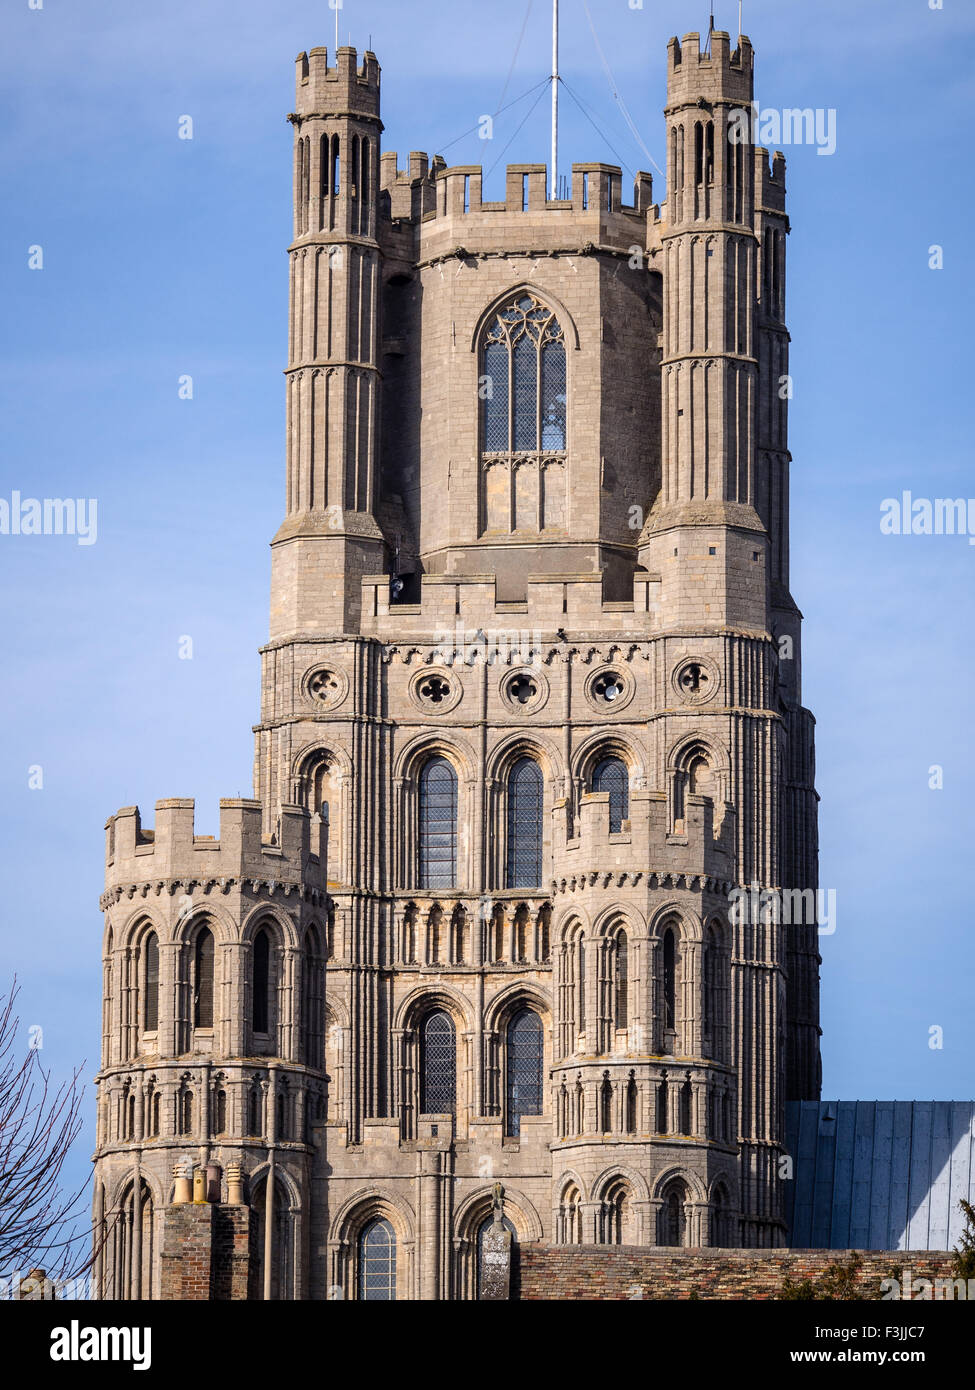 The west tower of Ely Cathedral in Cambridgeshire, England, UK. Viewed from the south with a blue sky. Stock Photo